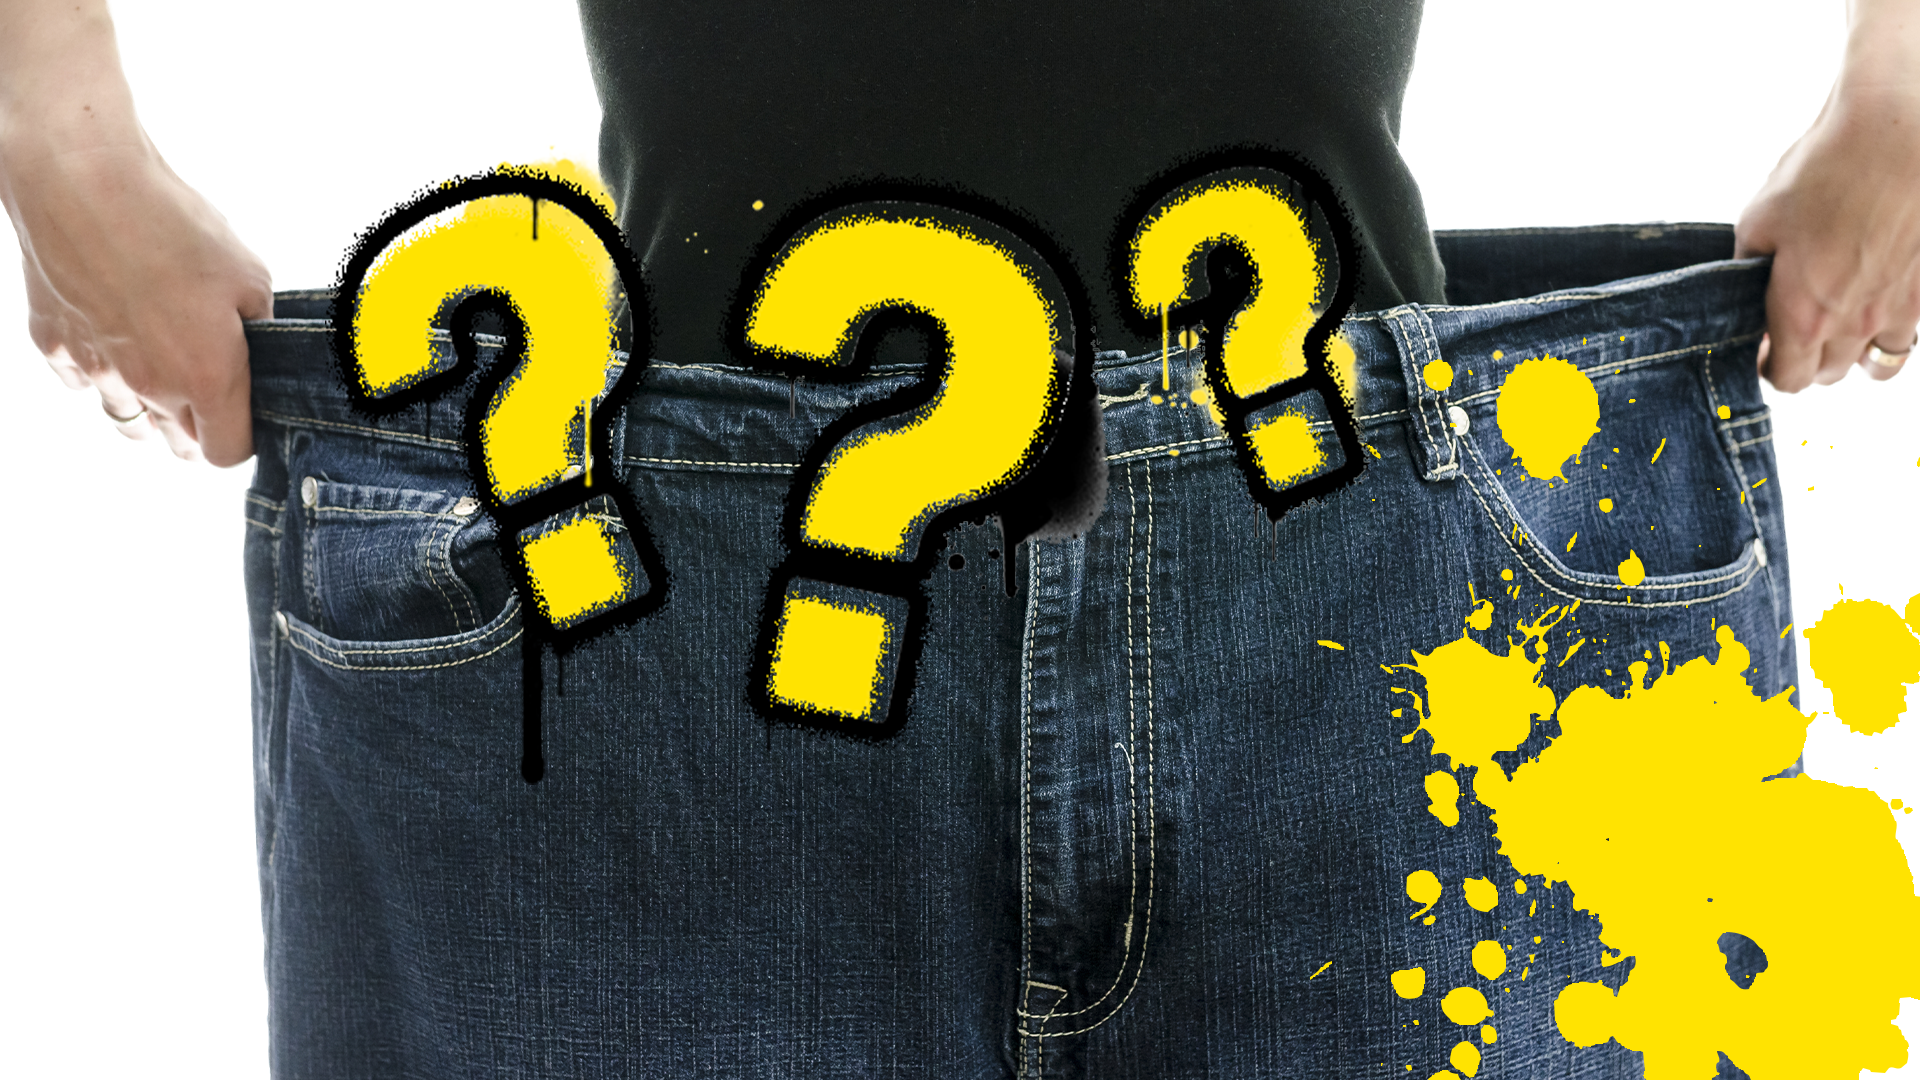 Someone wearing baggy jeans on white background with splats and question marks